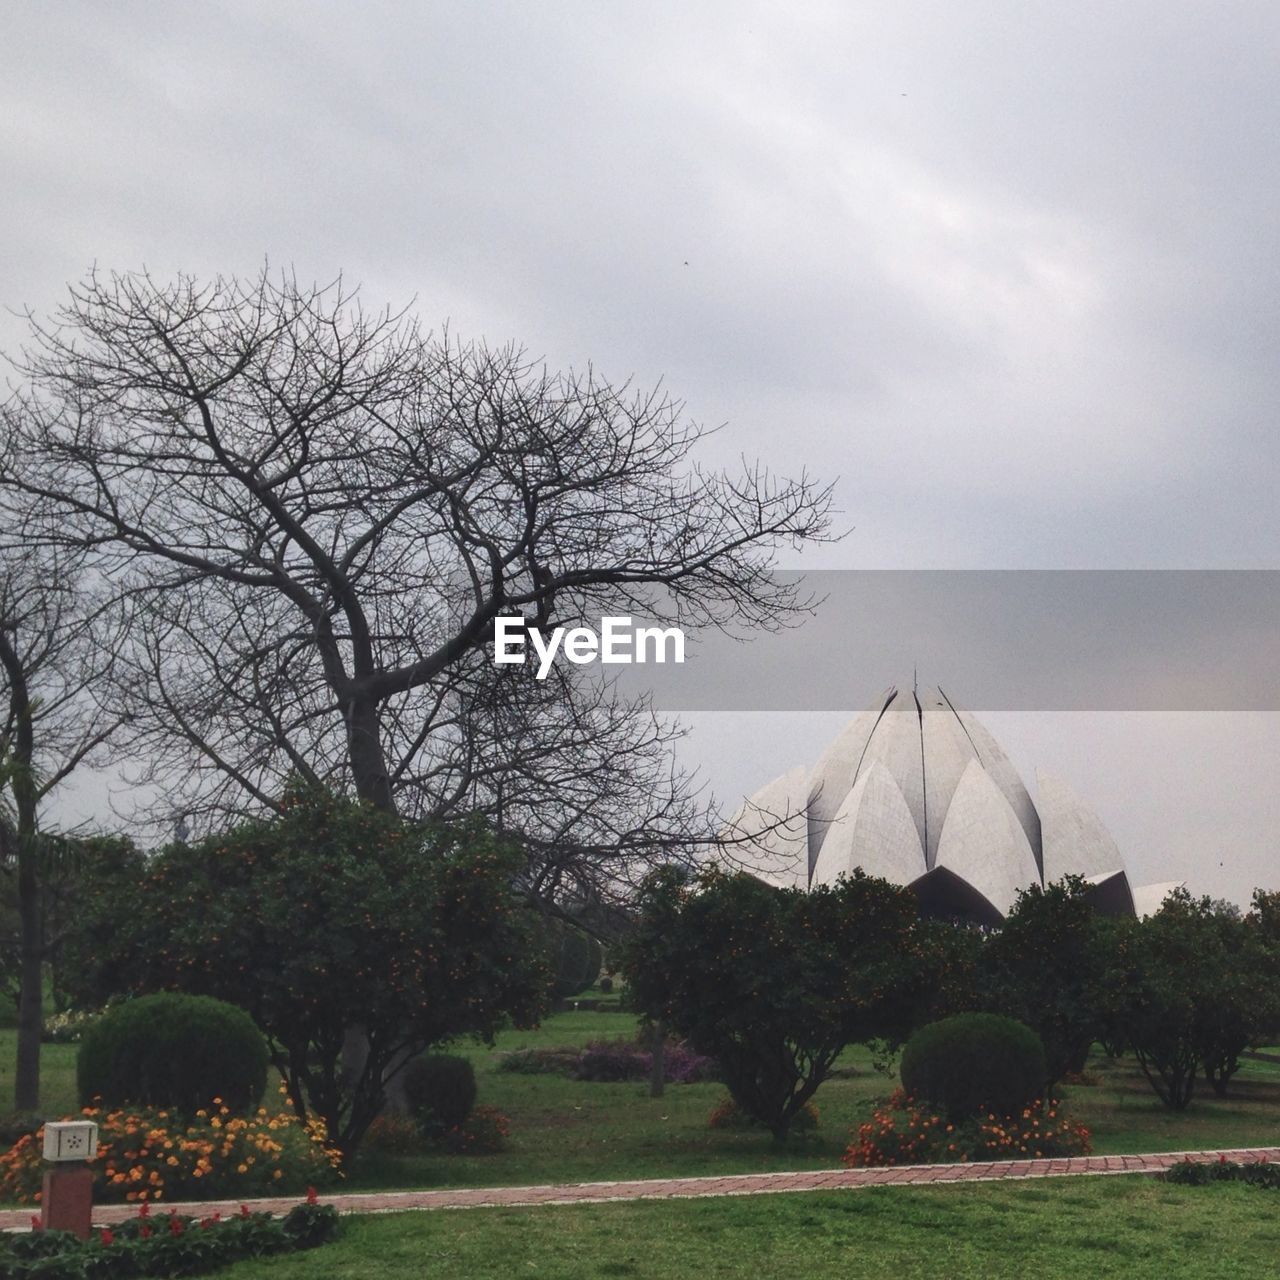 Lotus temple surrounded by formal garden against cloudy sky